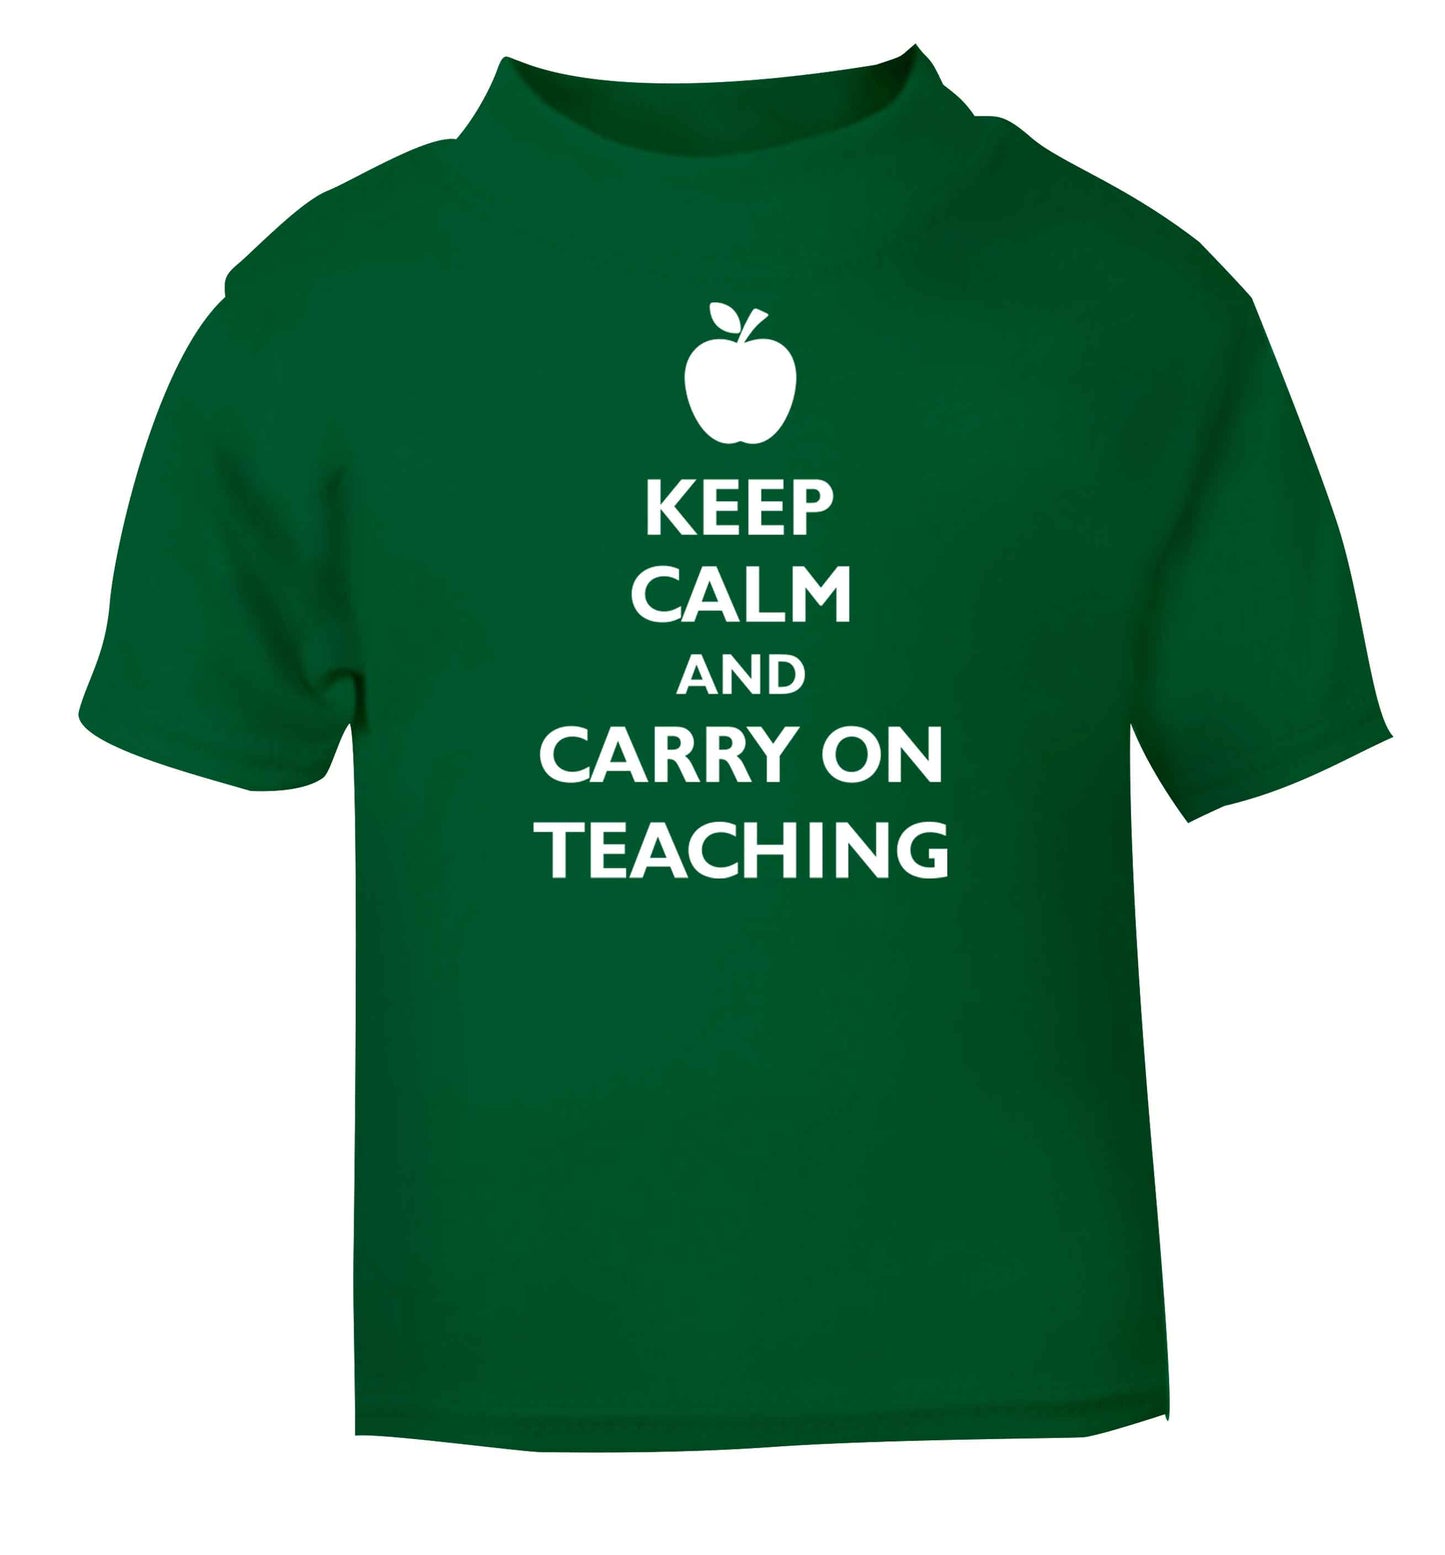 Keep calm and carry on teaching green baby toddler Tshirt 2 Years